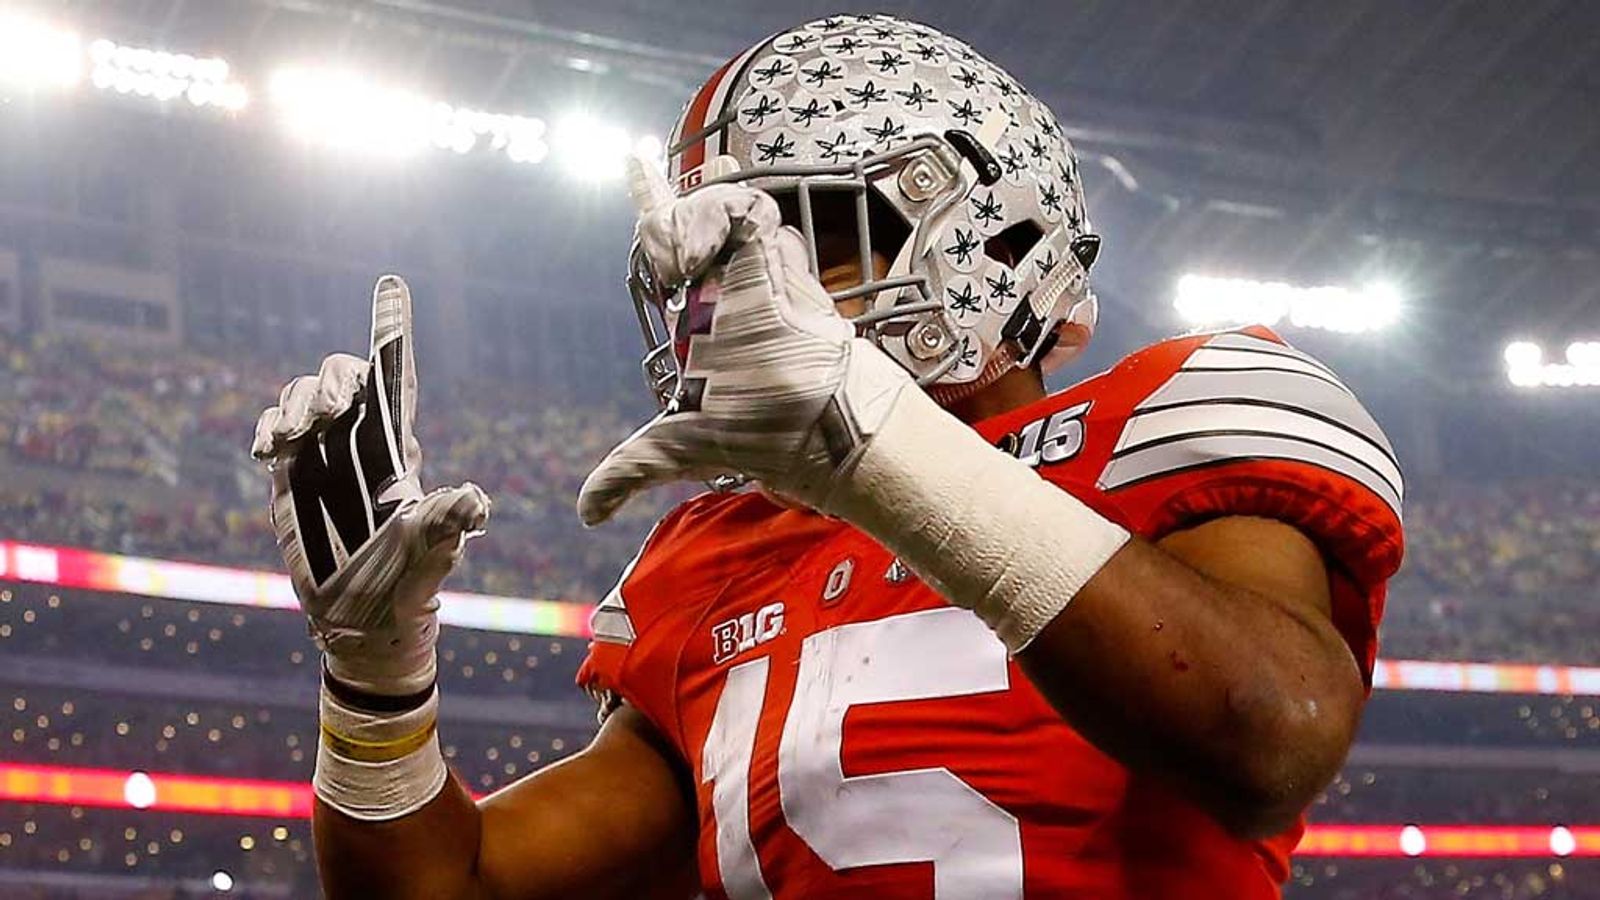 Ohio State rout Oregon to win College Football title NFL News Sky